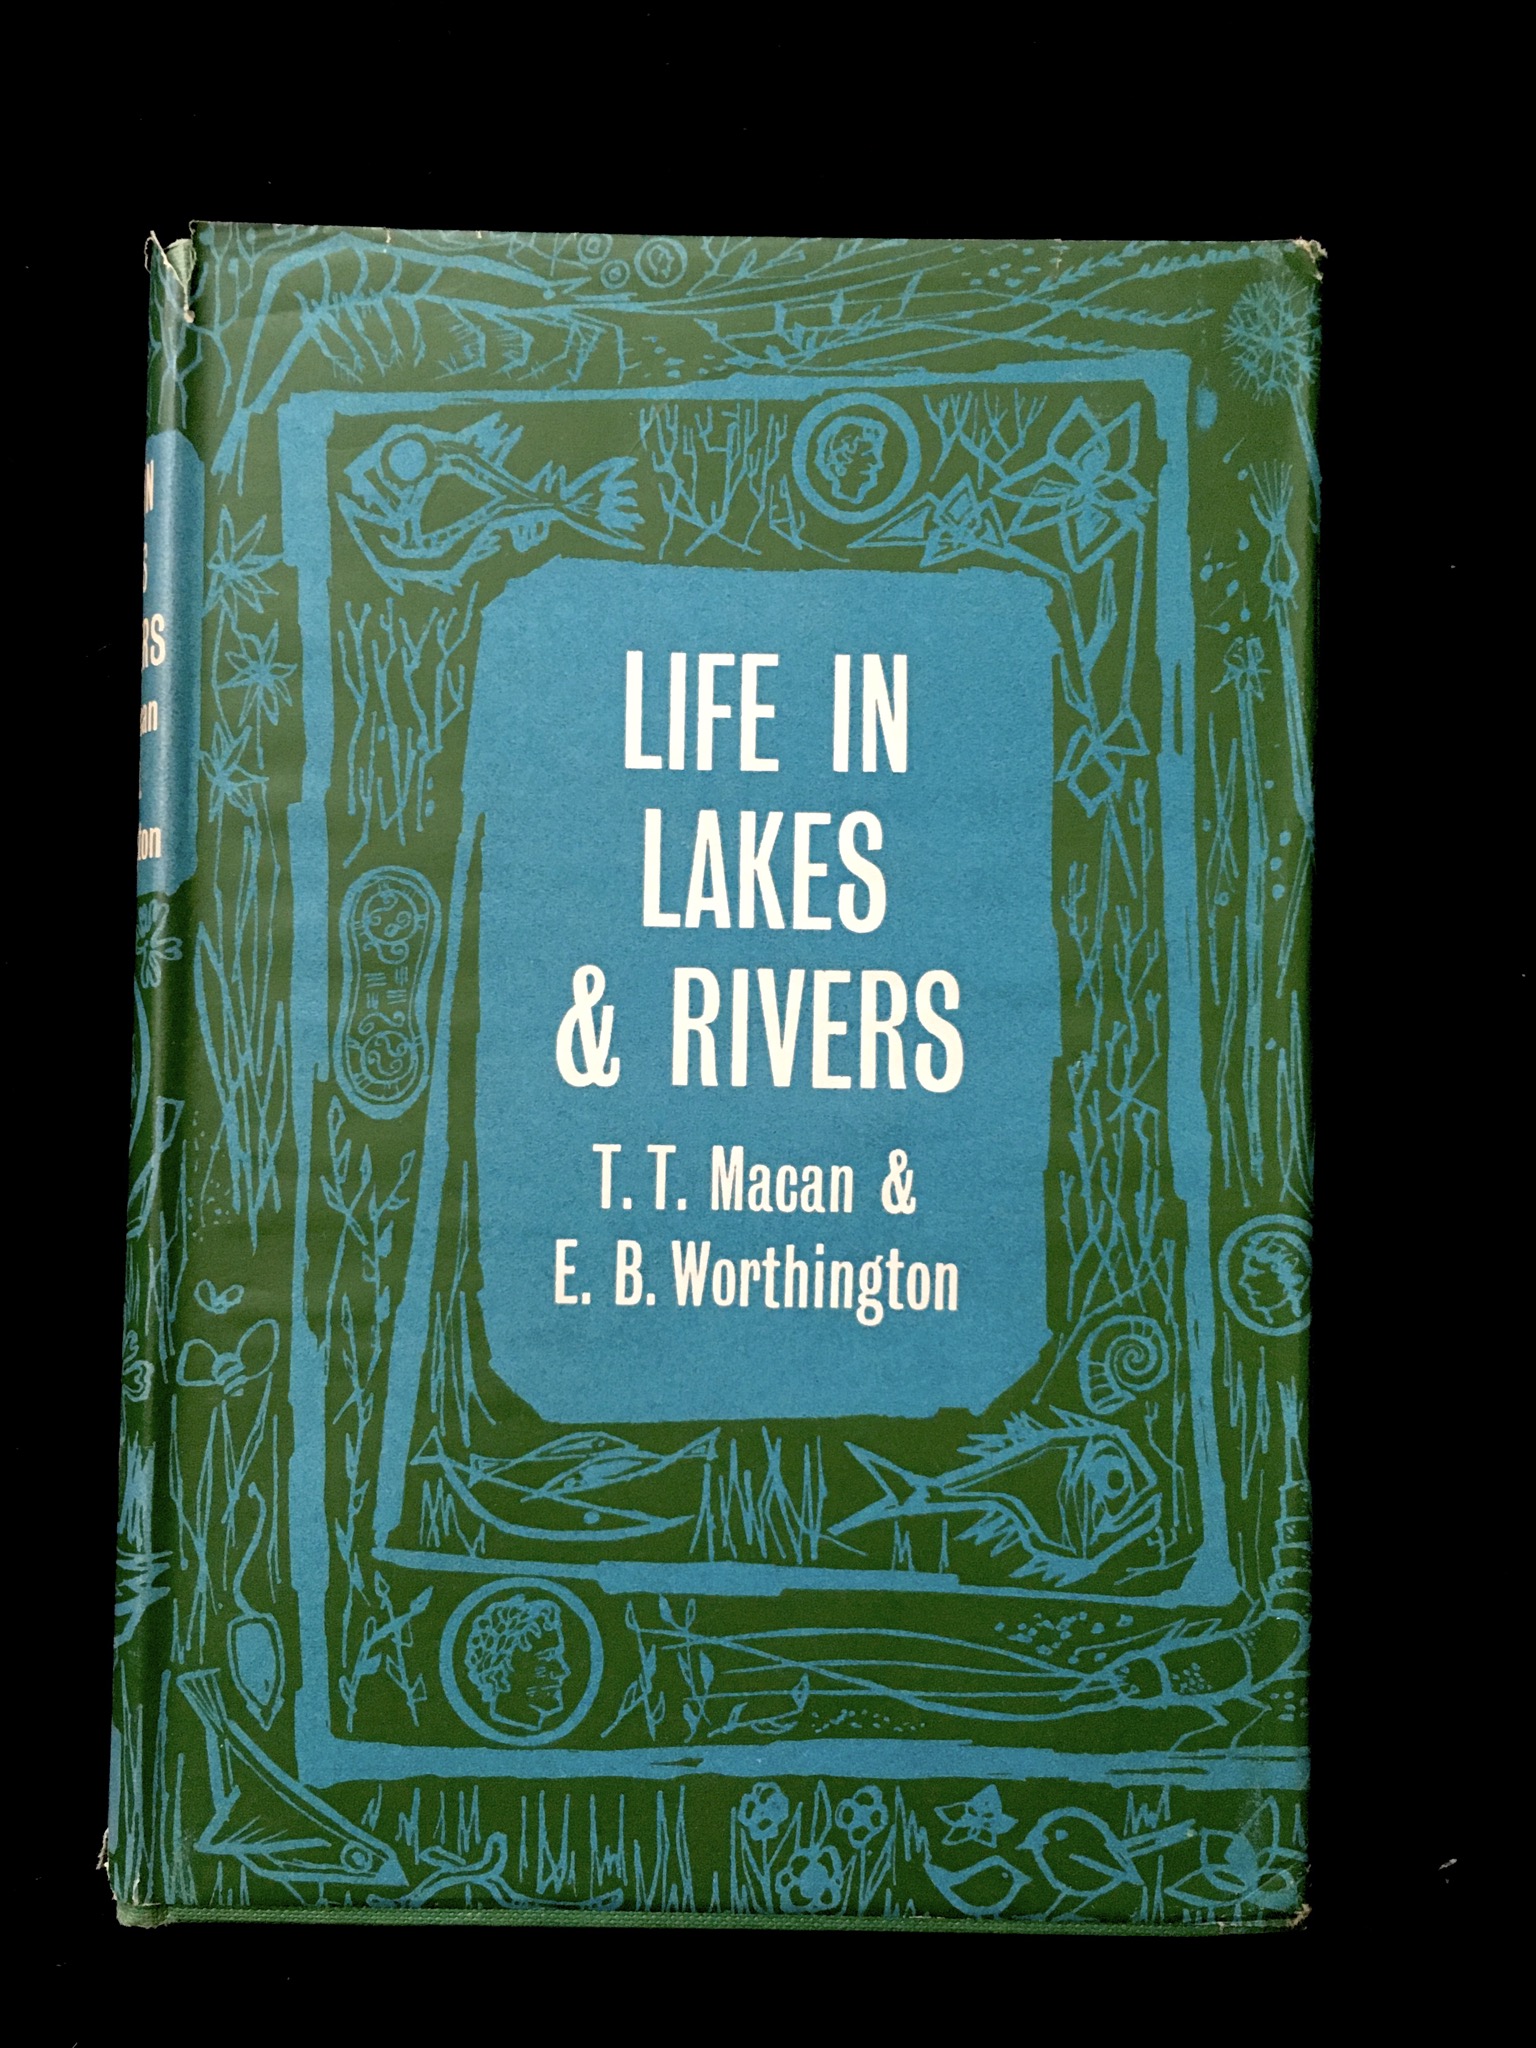 Life In Lakes & Rivers by T. T. Macan & E.B. Worthington